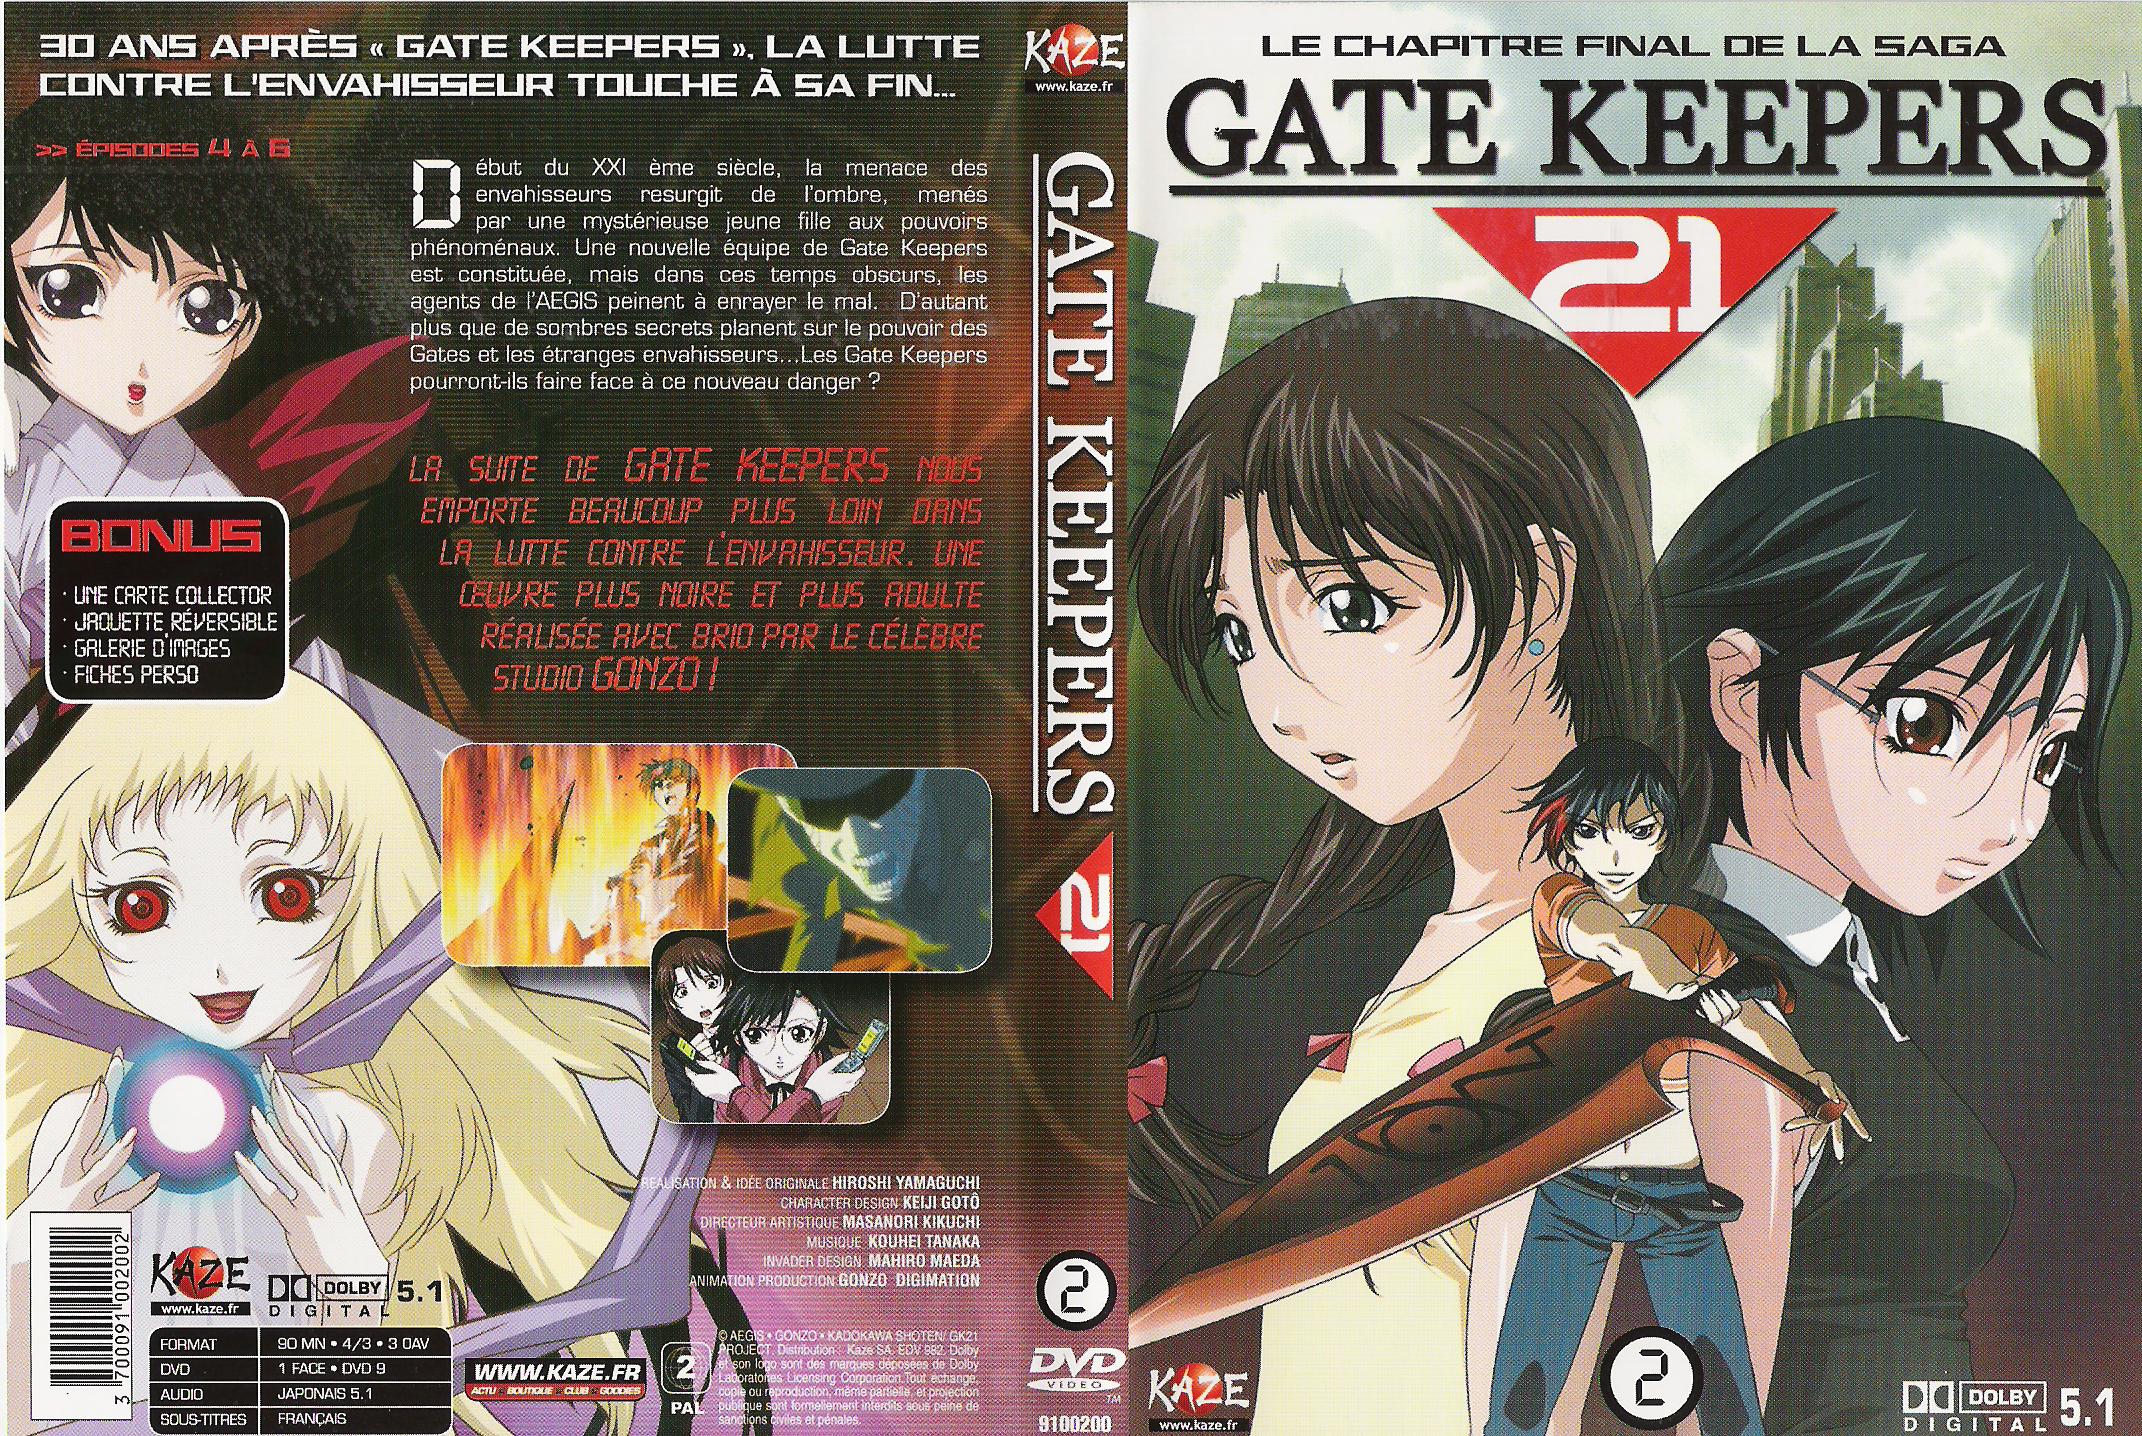 Jaquette DVD Gate Keepers 21 DVD 2